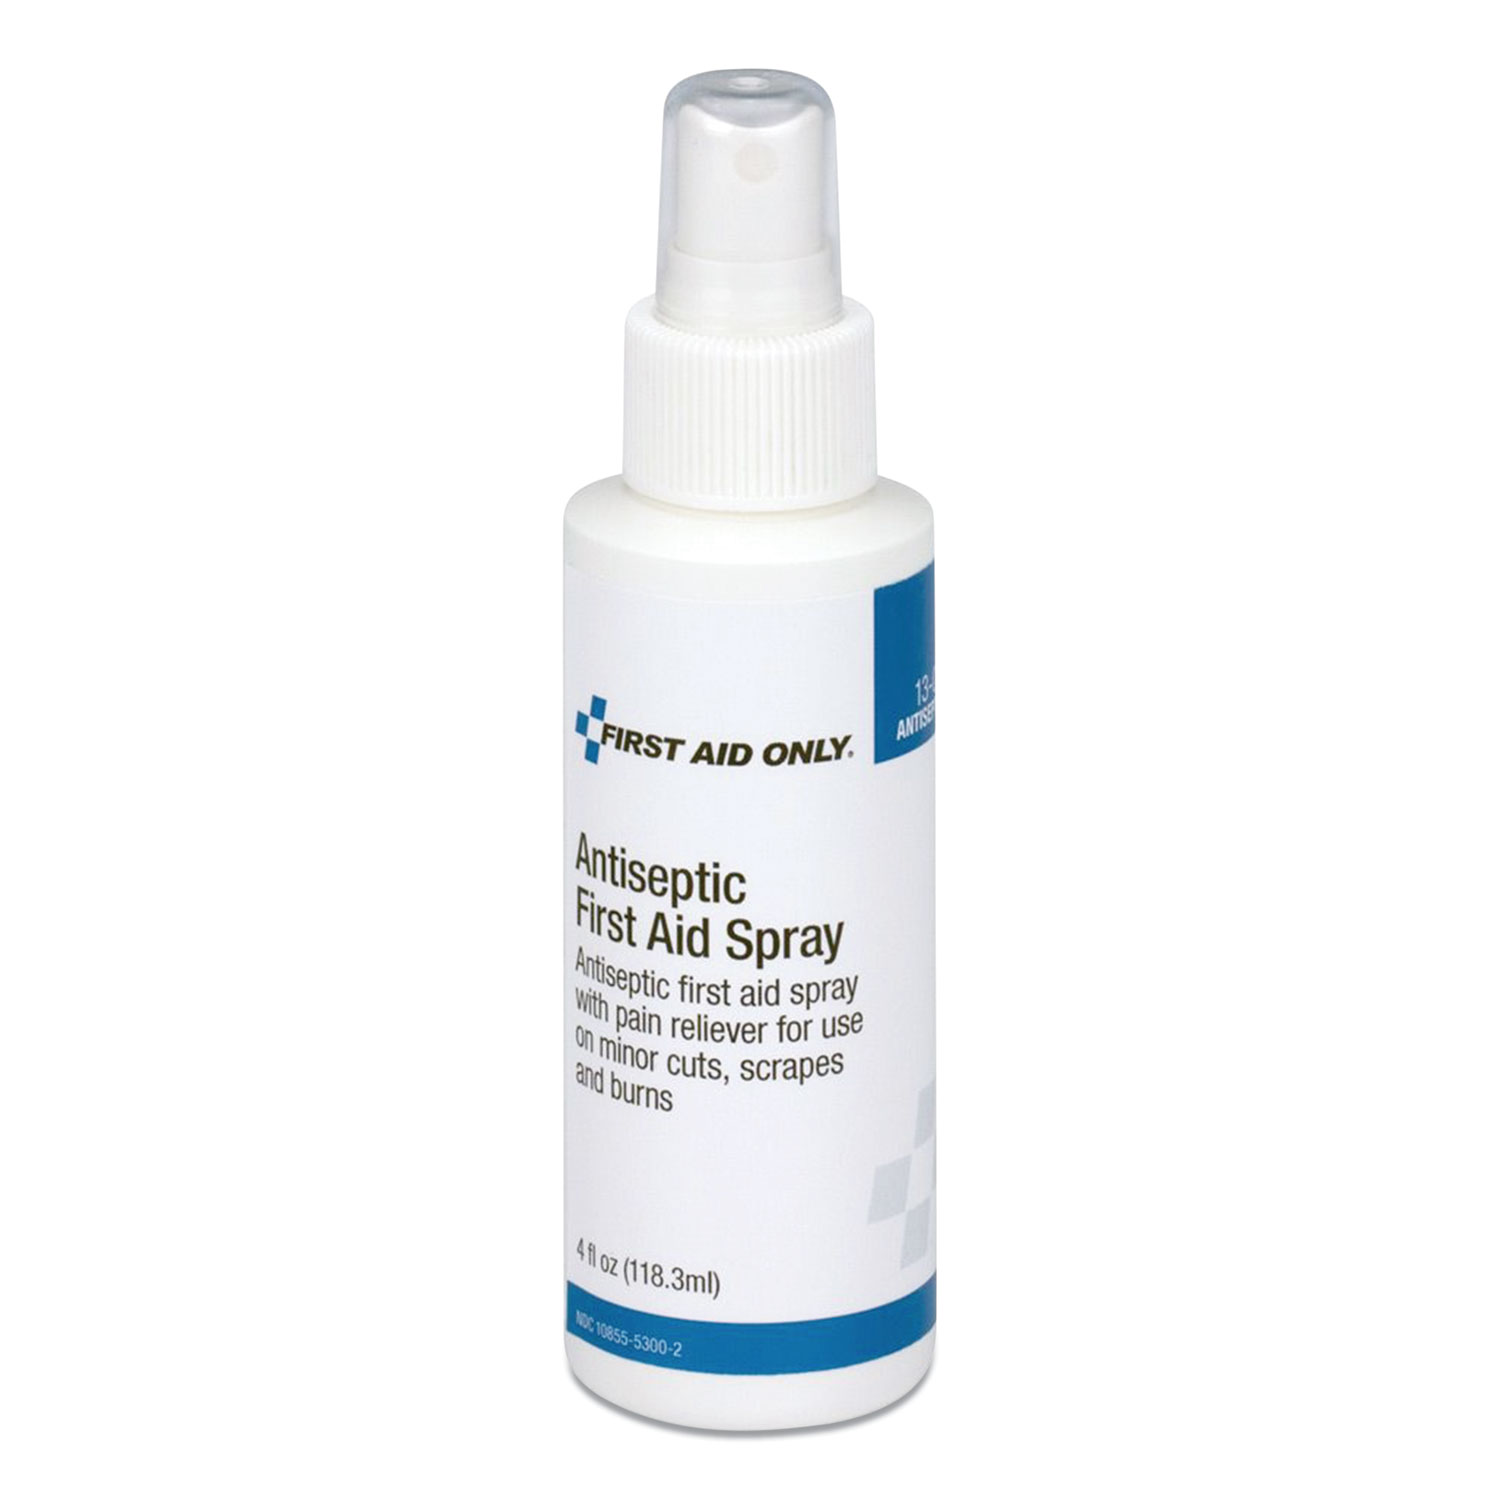 First Aid Only™ SmartCompliance Antiseptic First Aid Spray, 4 oz Bottle